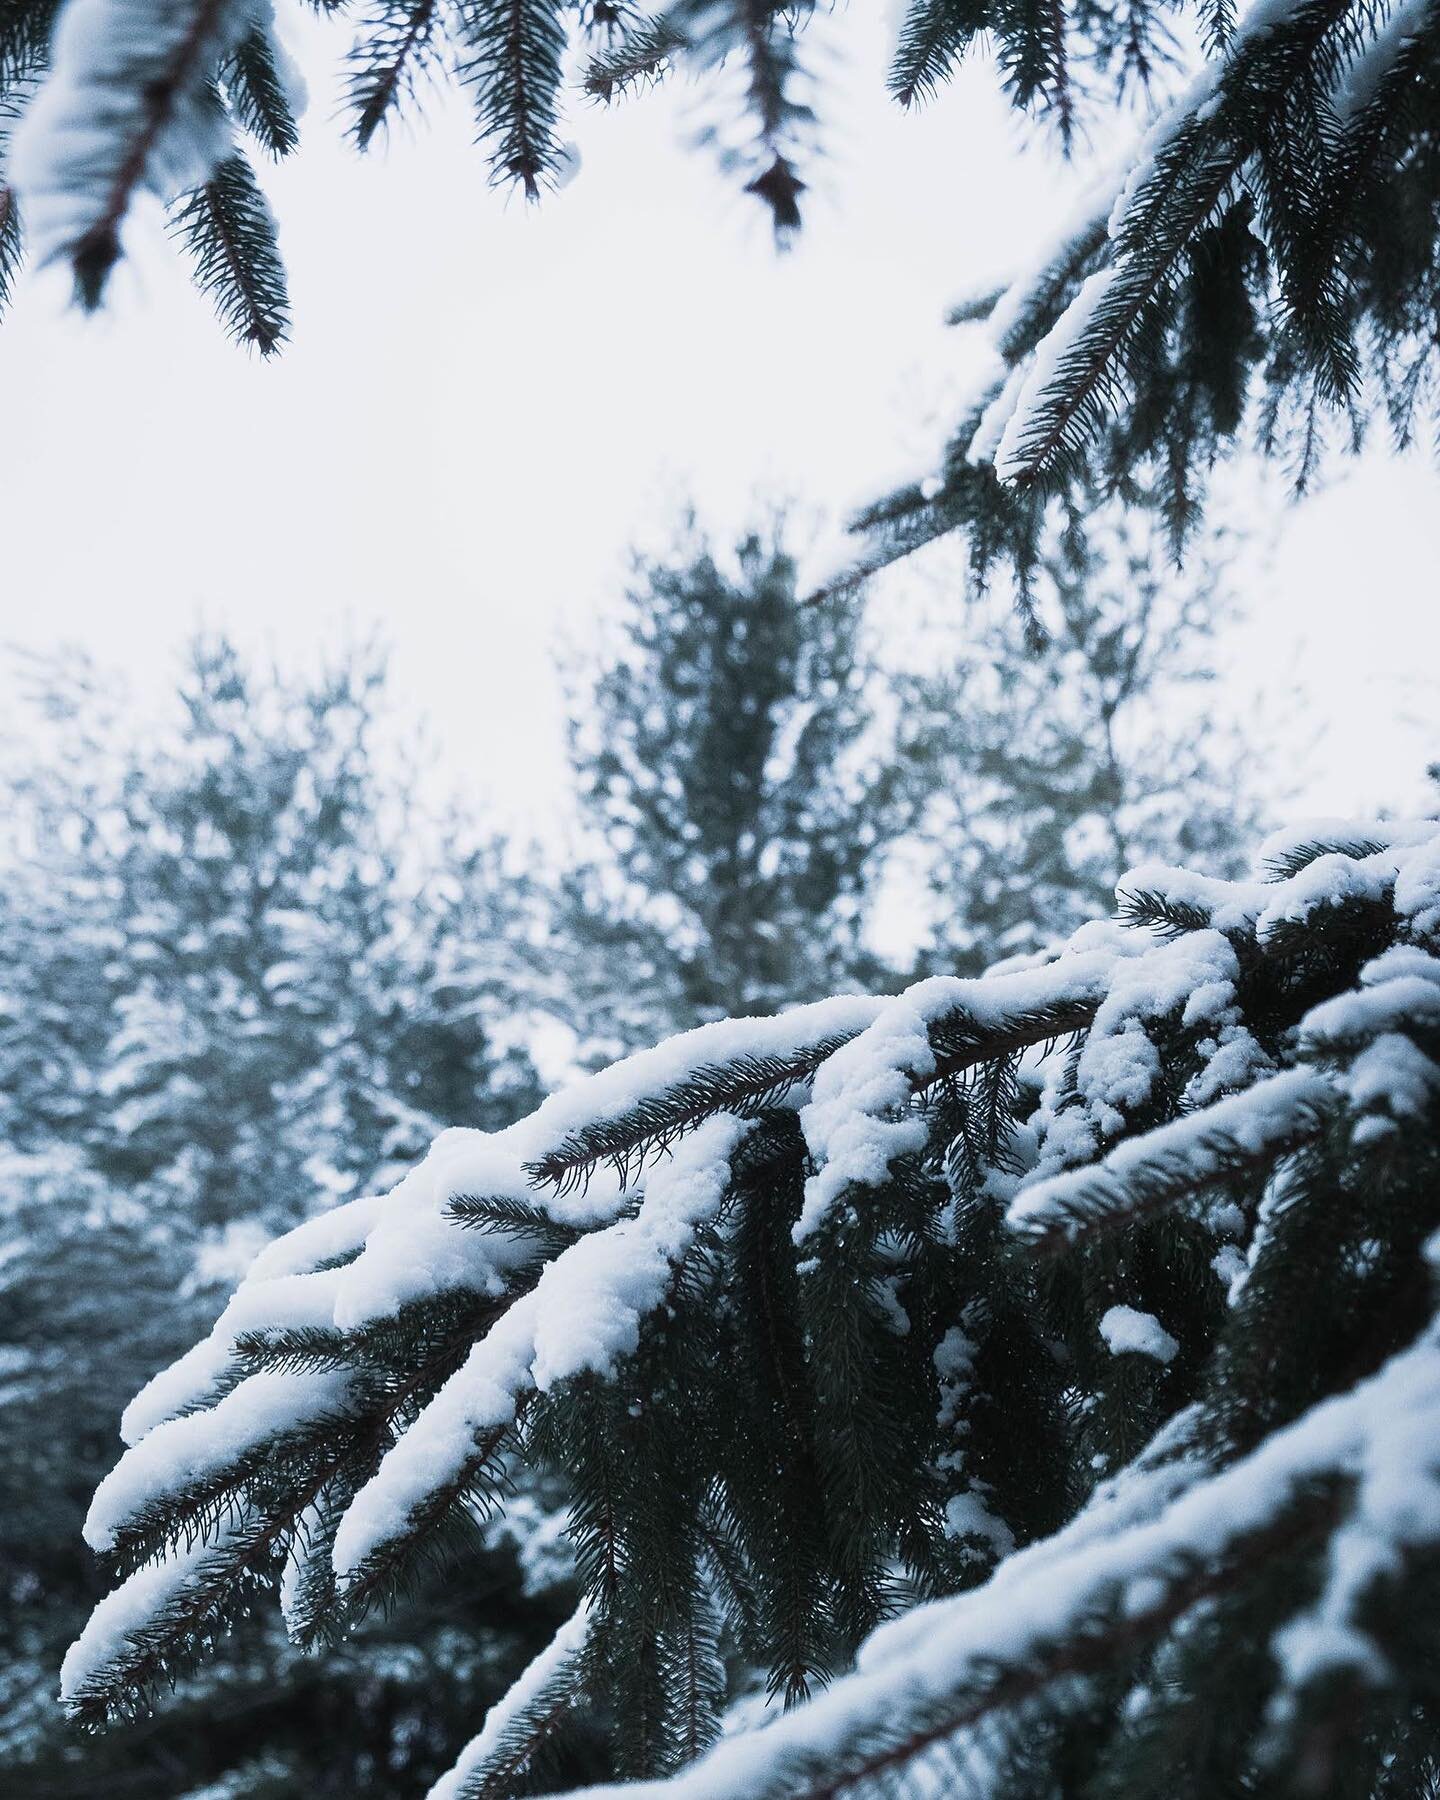 When there is snow on the evergreens, you take photos. I don&rsquo;t make the rules. 🌲